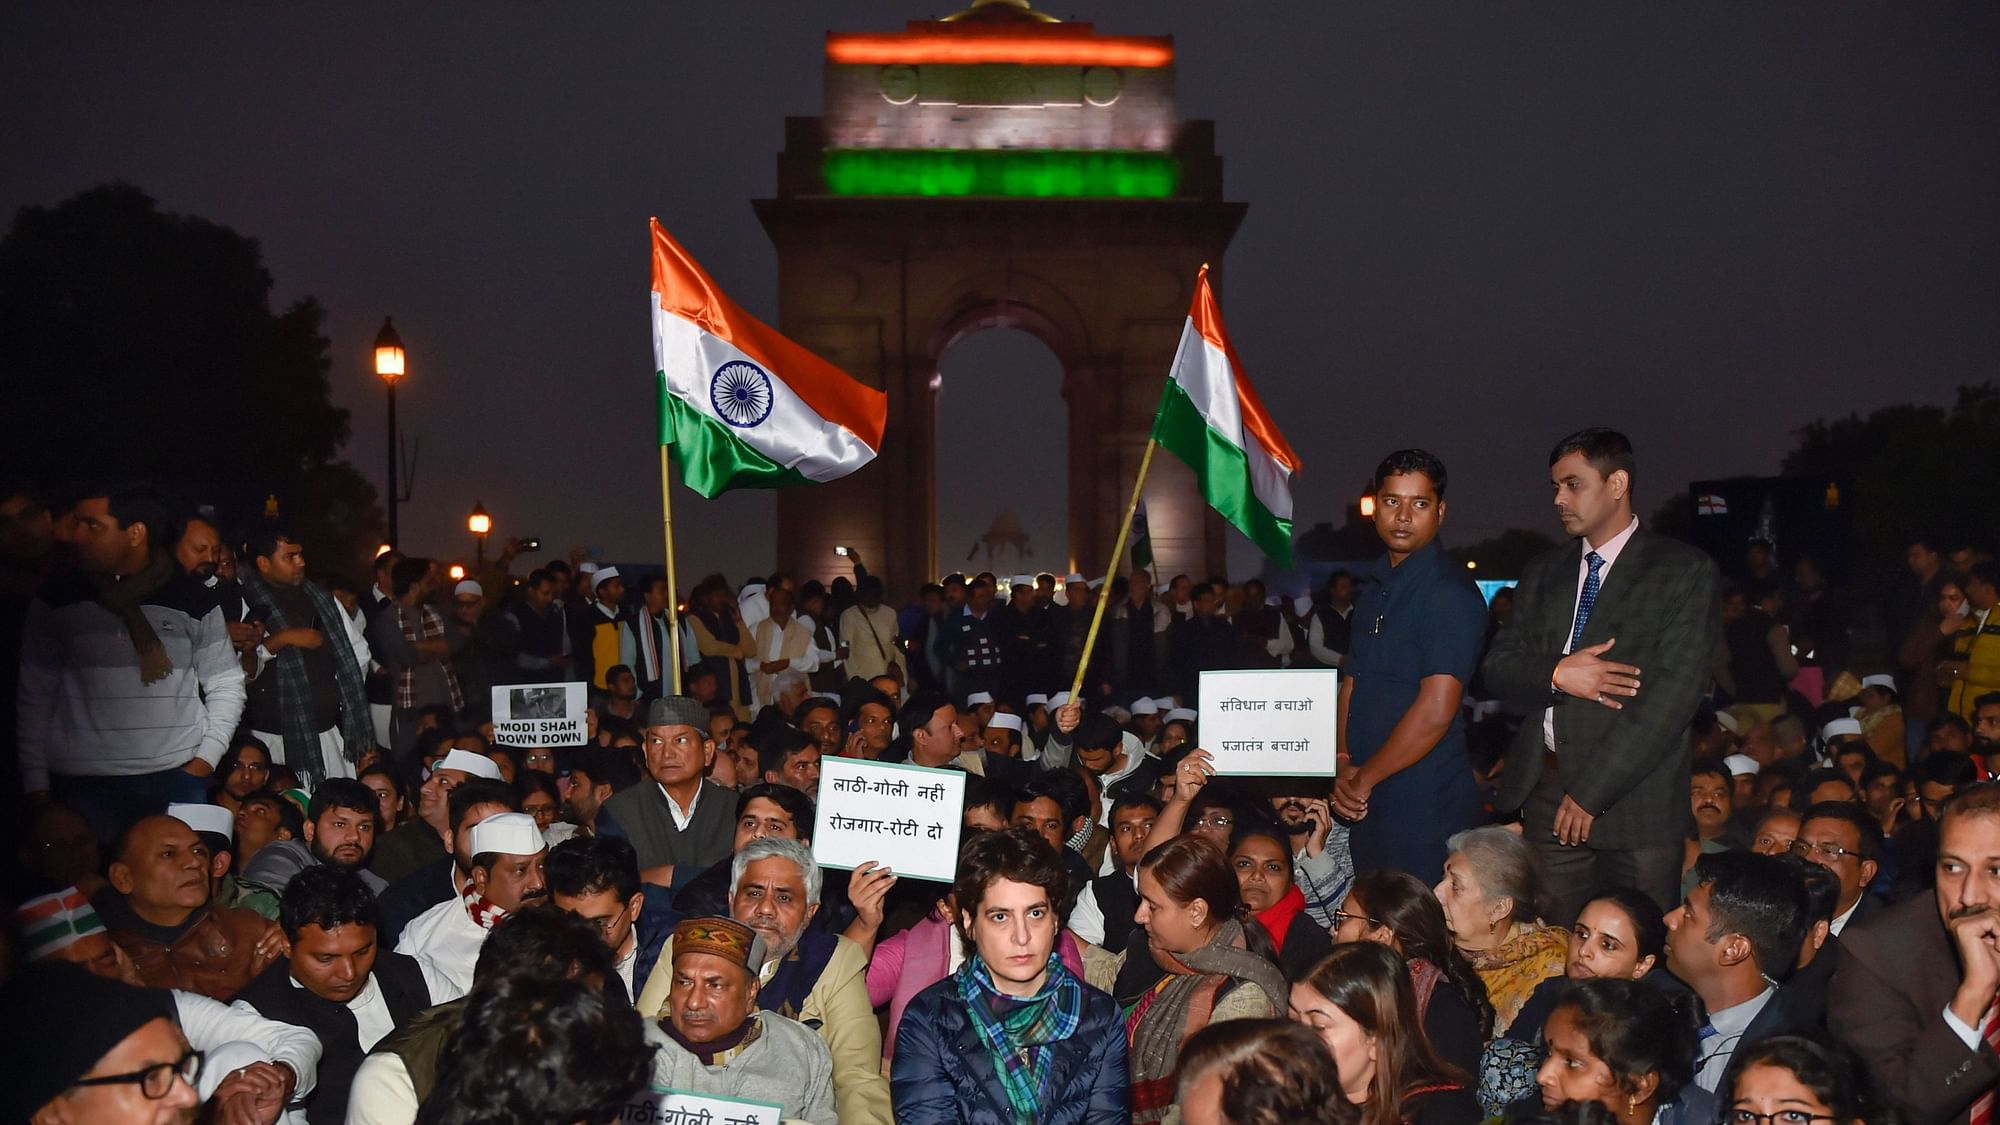 The protesters raised slogans against Delhi Police and “dictatorial” attitude of the government.